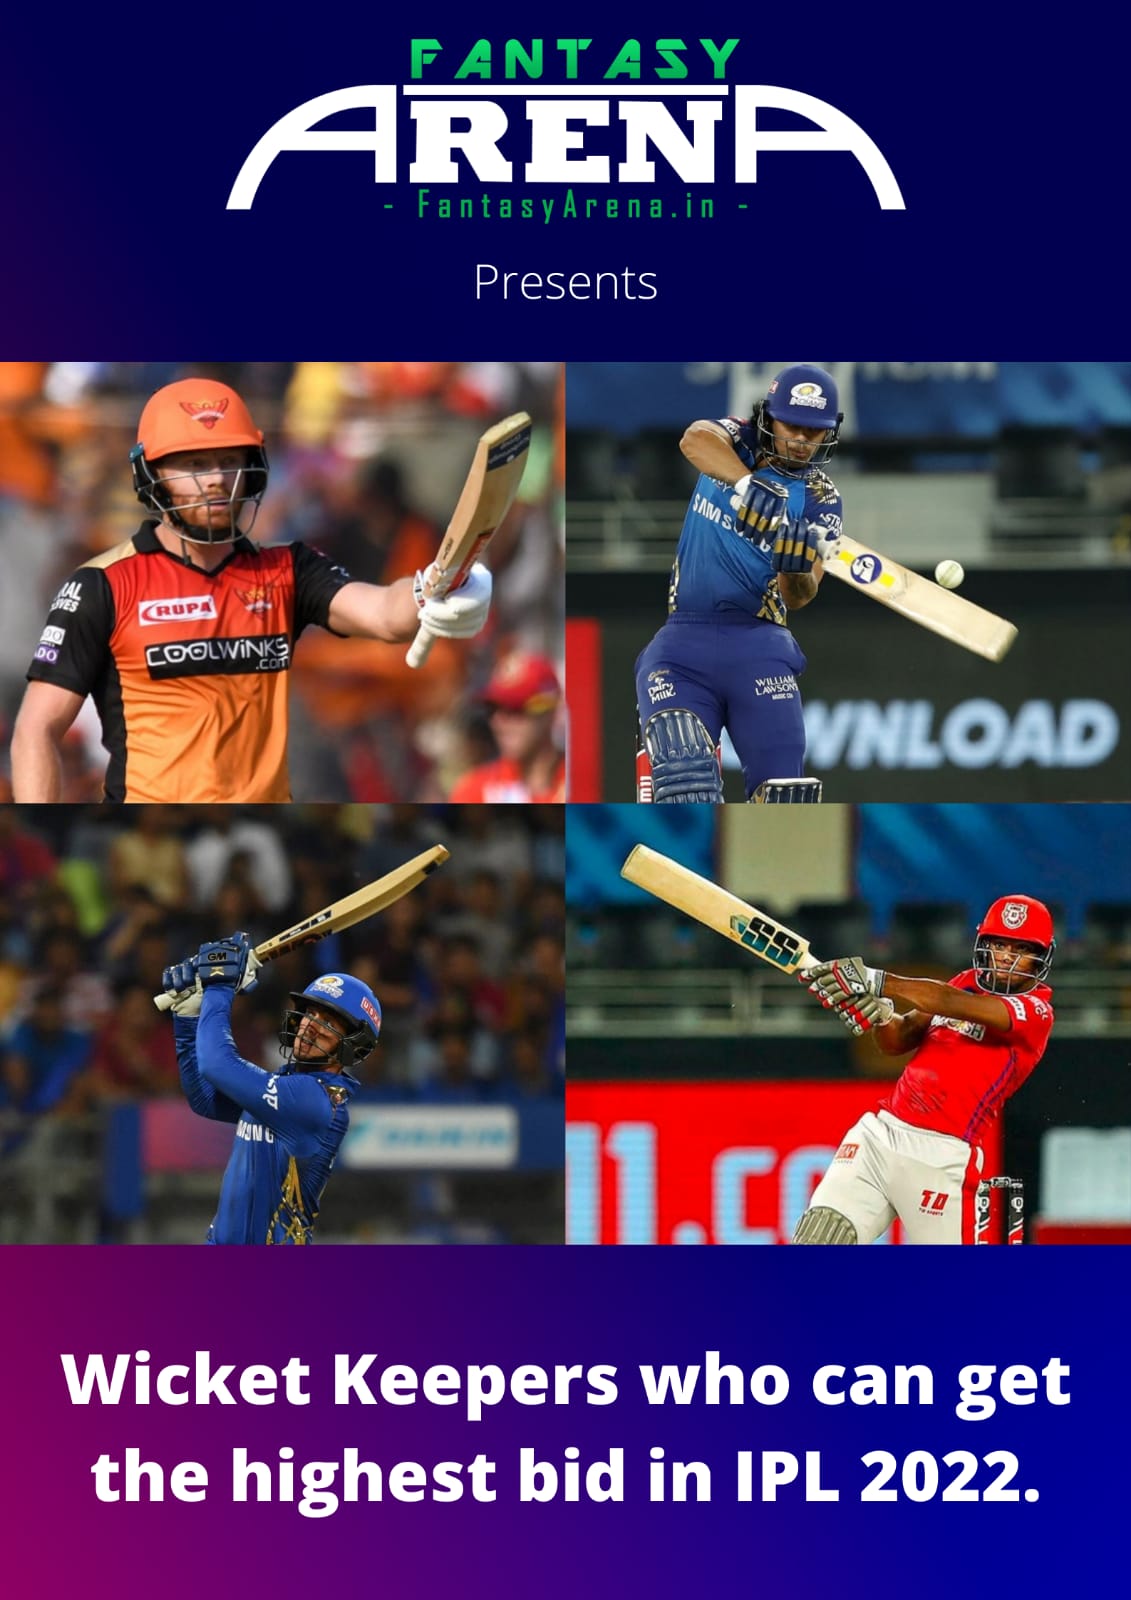 Top 5 Wicket Keepers who can get the highest bid in IPL 2022.